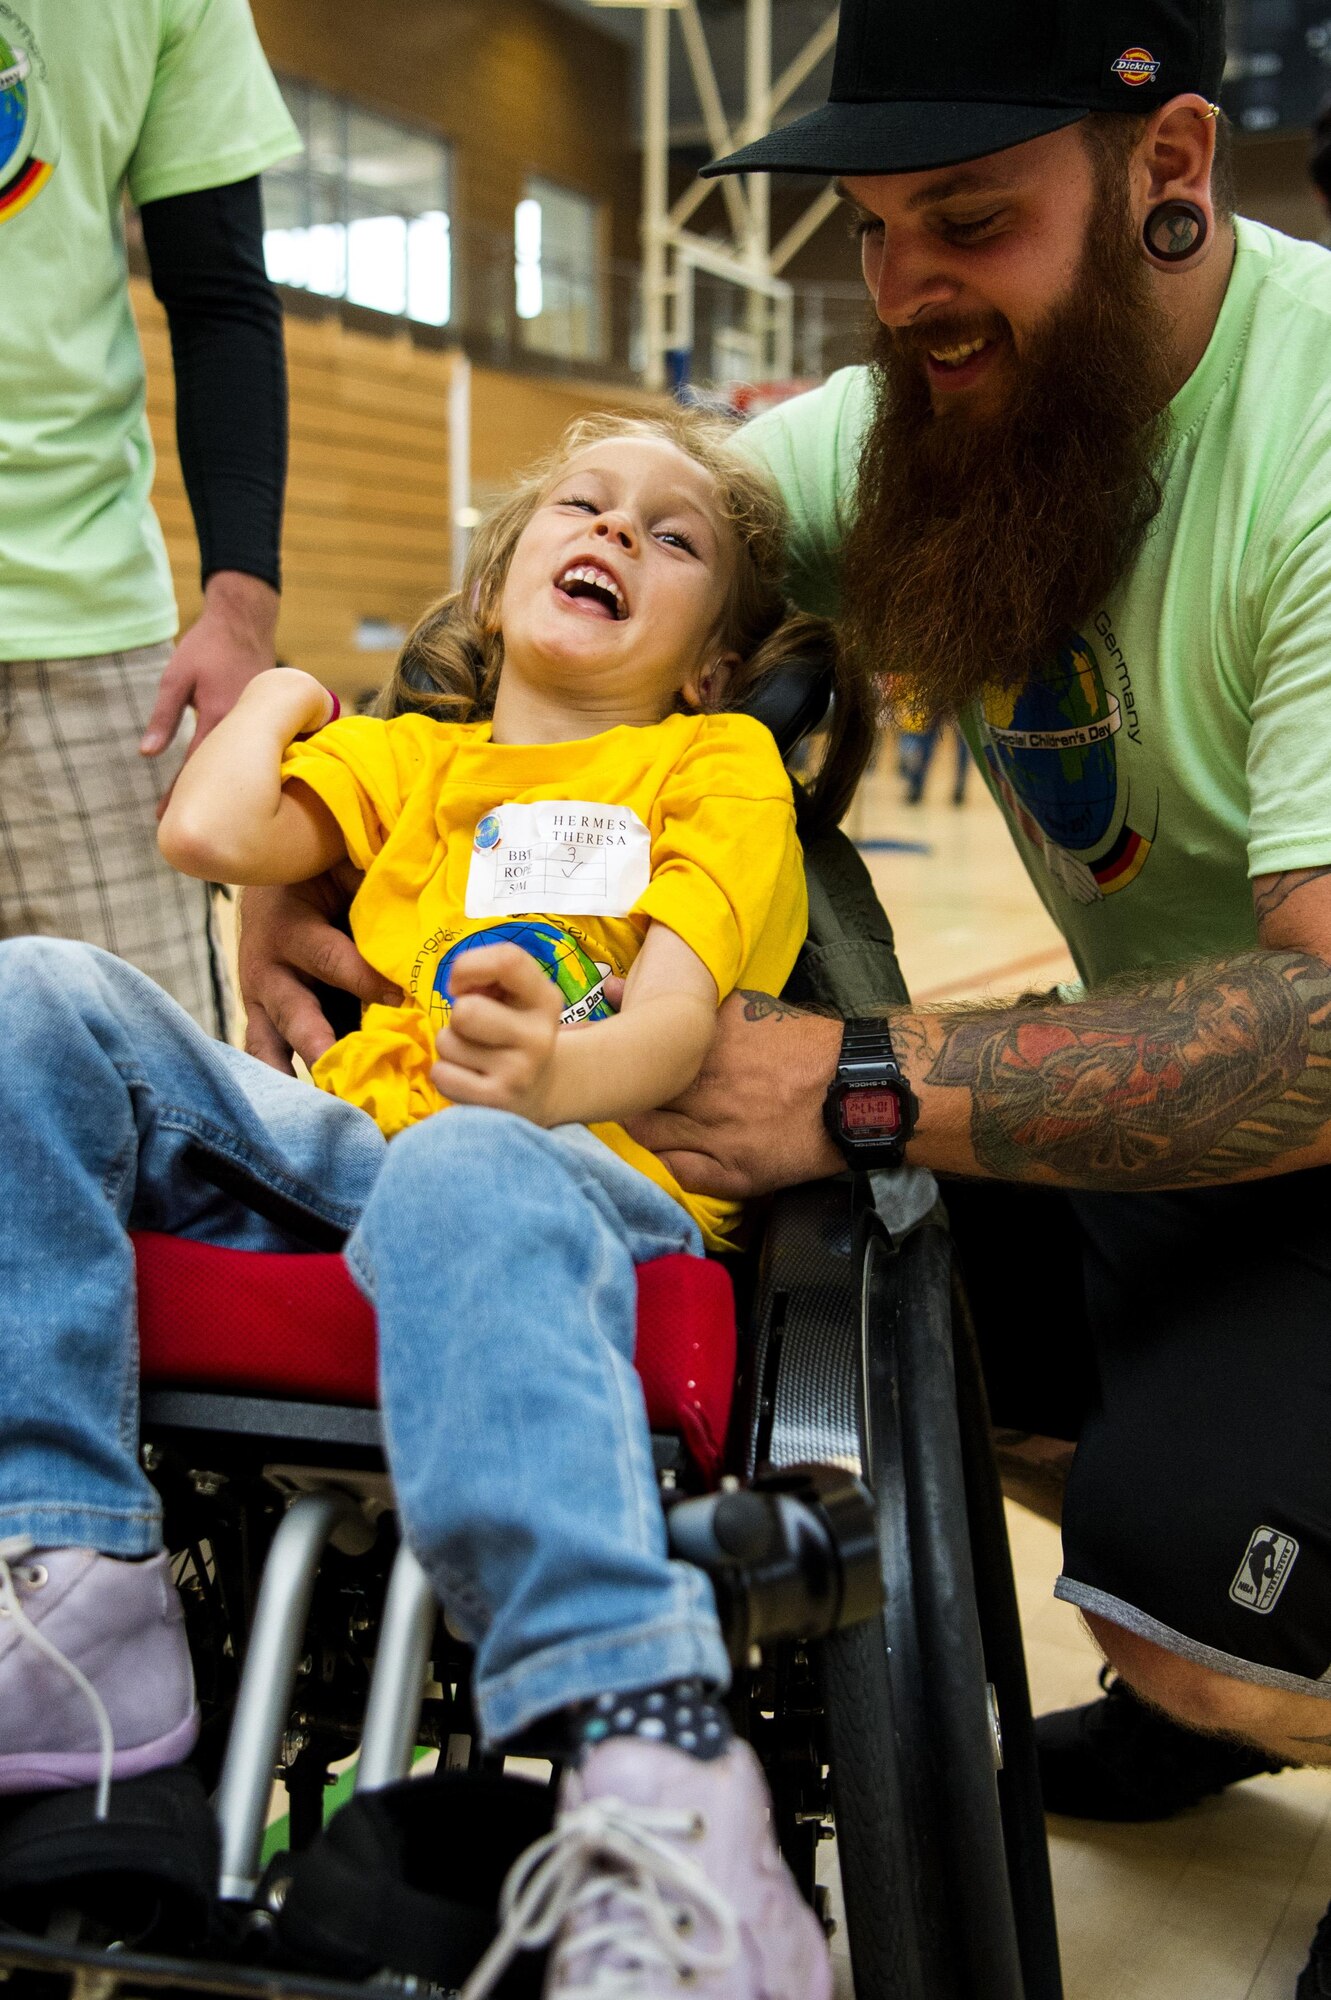 Theresa Hermes, left, Bitburg student, laughs with Mirius Zender, right, event volunteer, during the St. Martins Special Children's Day at Spangdahlem Air Base, Germany, June 28, 2017. The event marked the 25th year where students with special needs around the area were invited to participate in activities with volunteers. (U.S. Air Force photo by Senior Airman Preston Cherry)